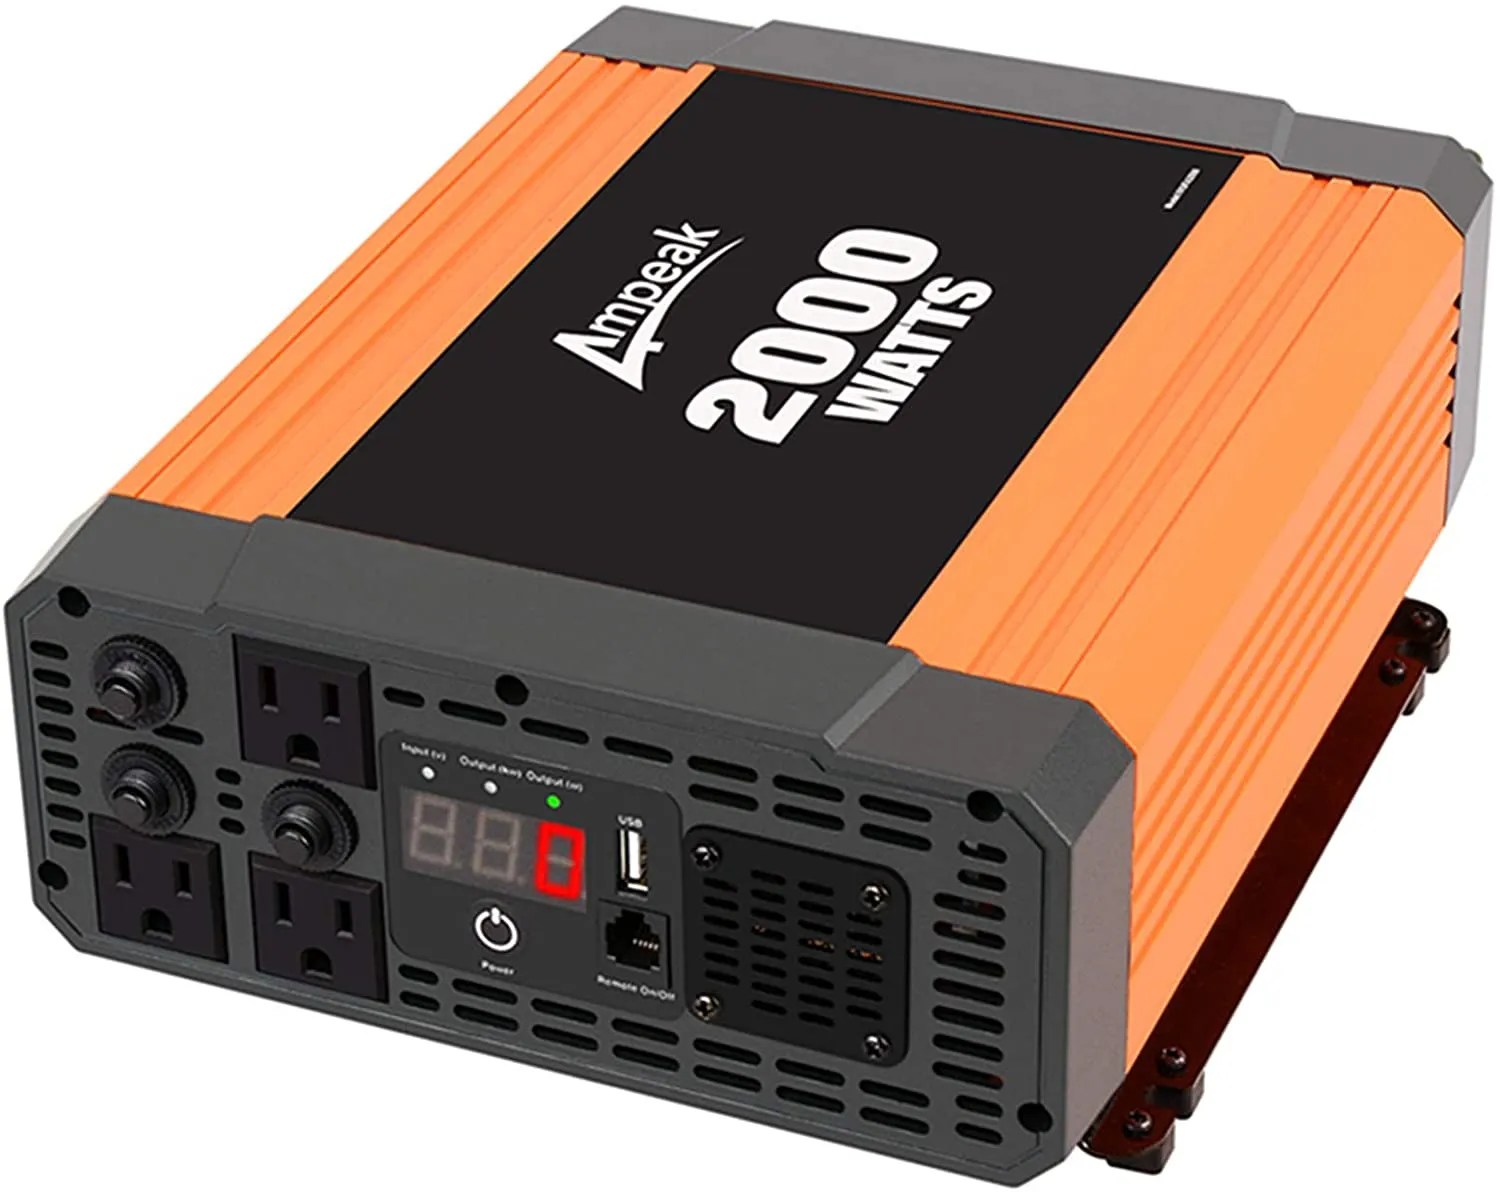 5 Best Power Inverters For Your Home in 2022